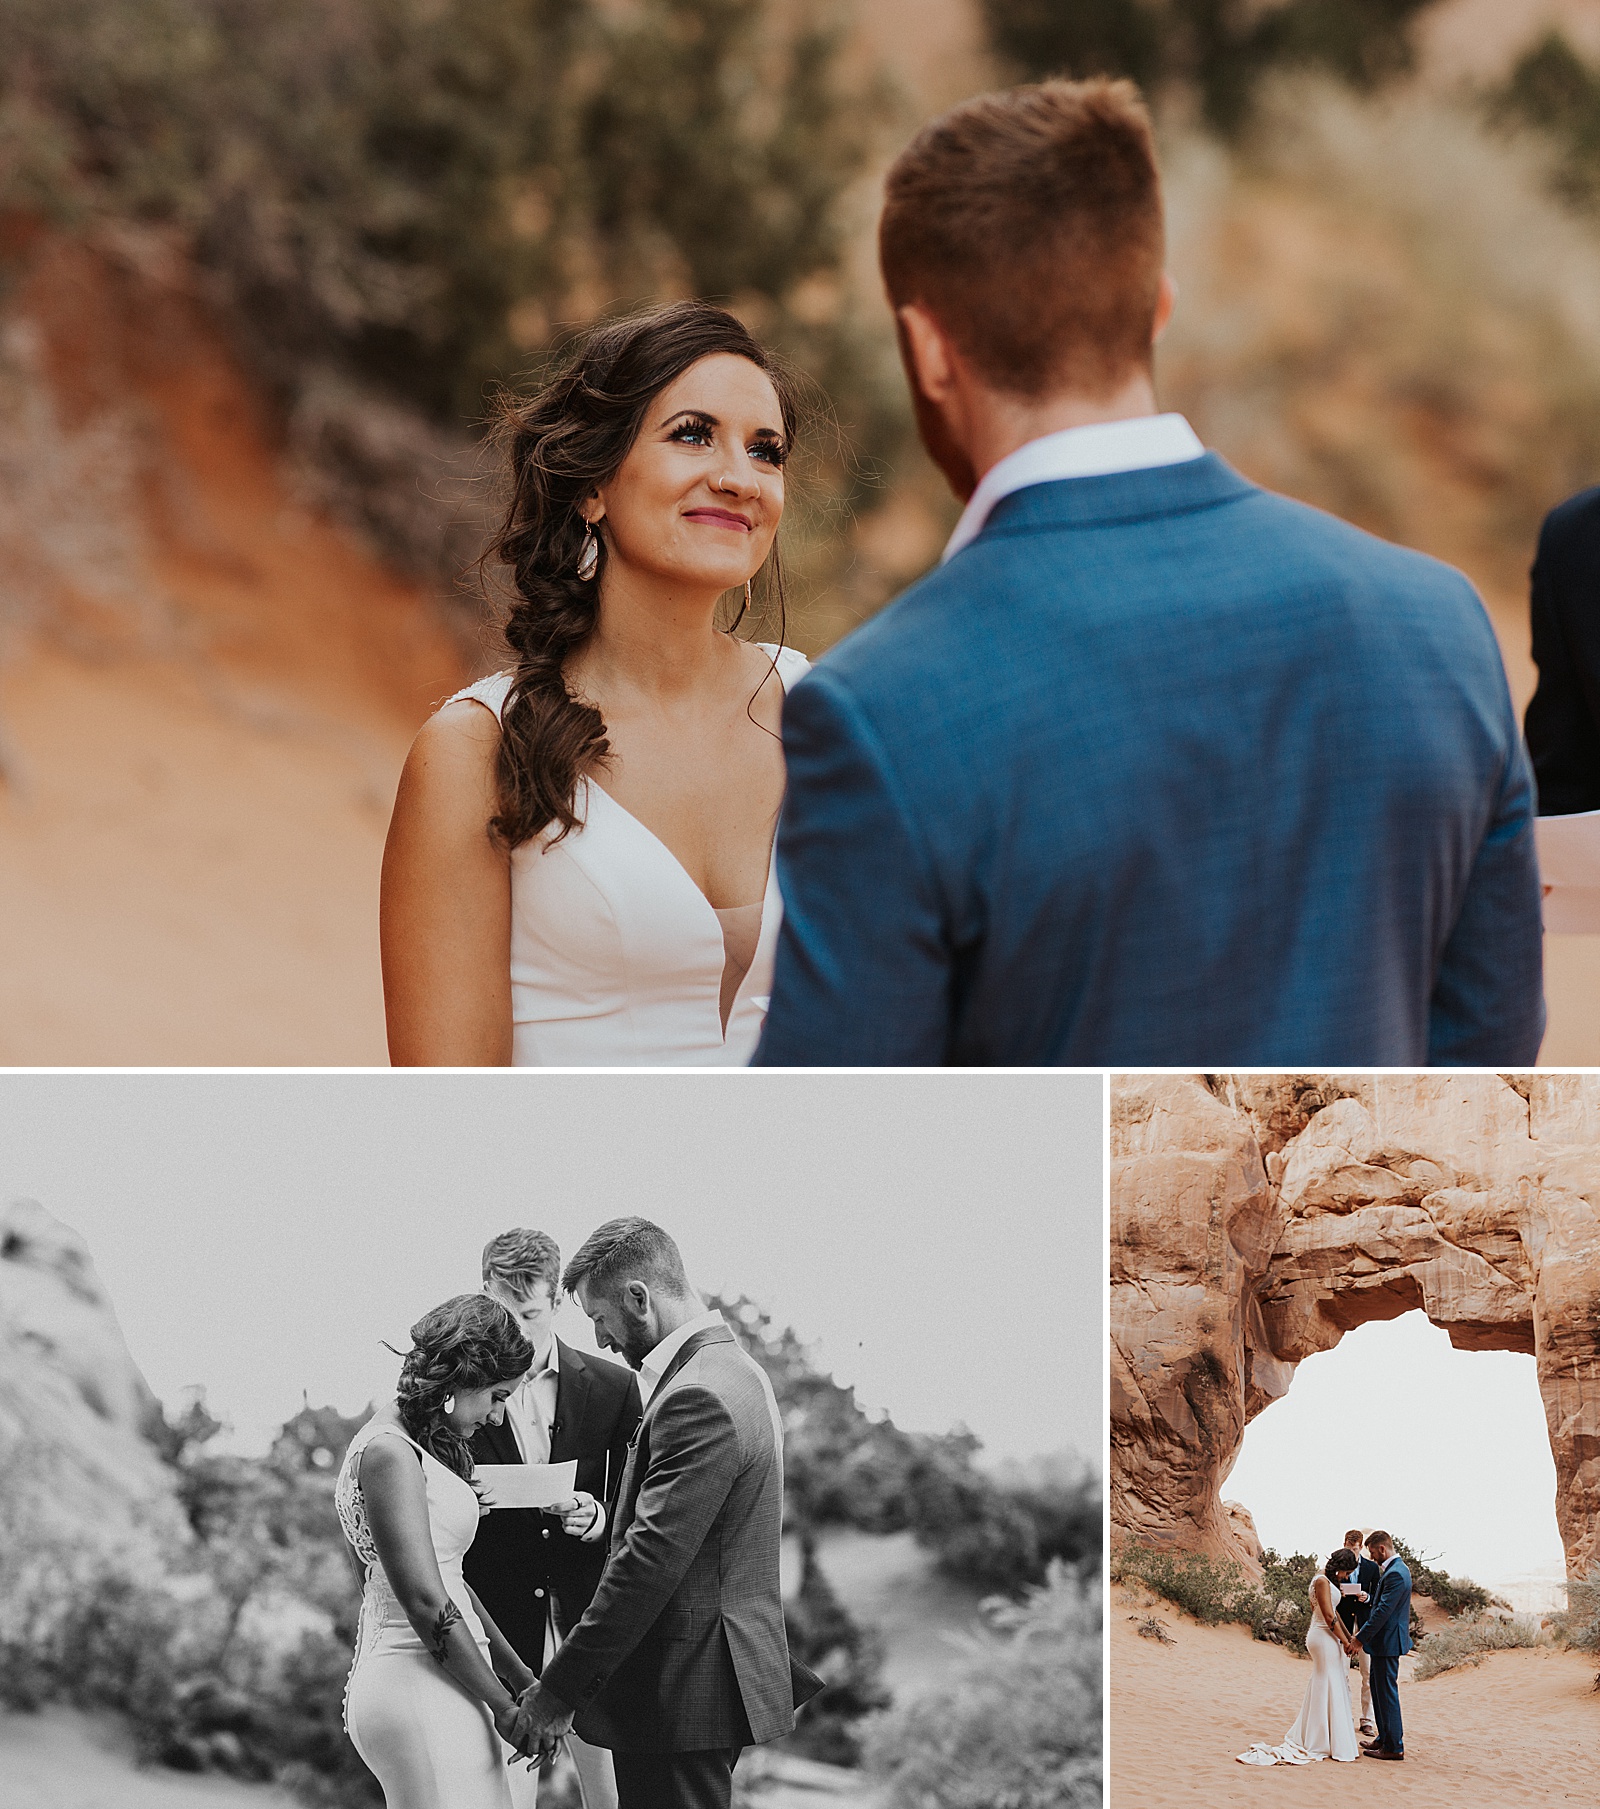 Bride and groom at their Arches National Park wedding ceremony. 